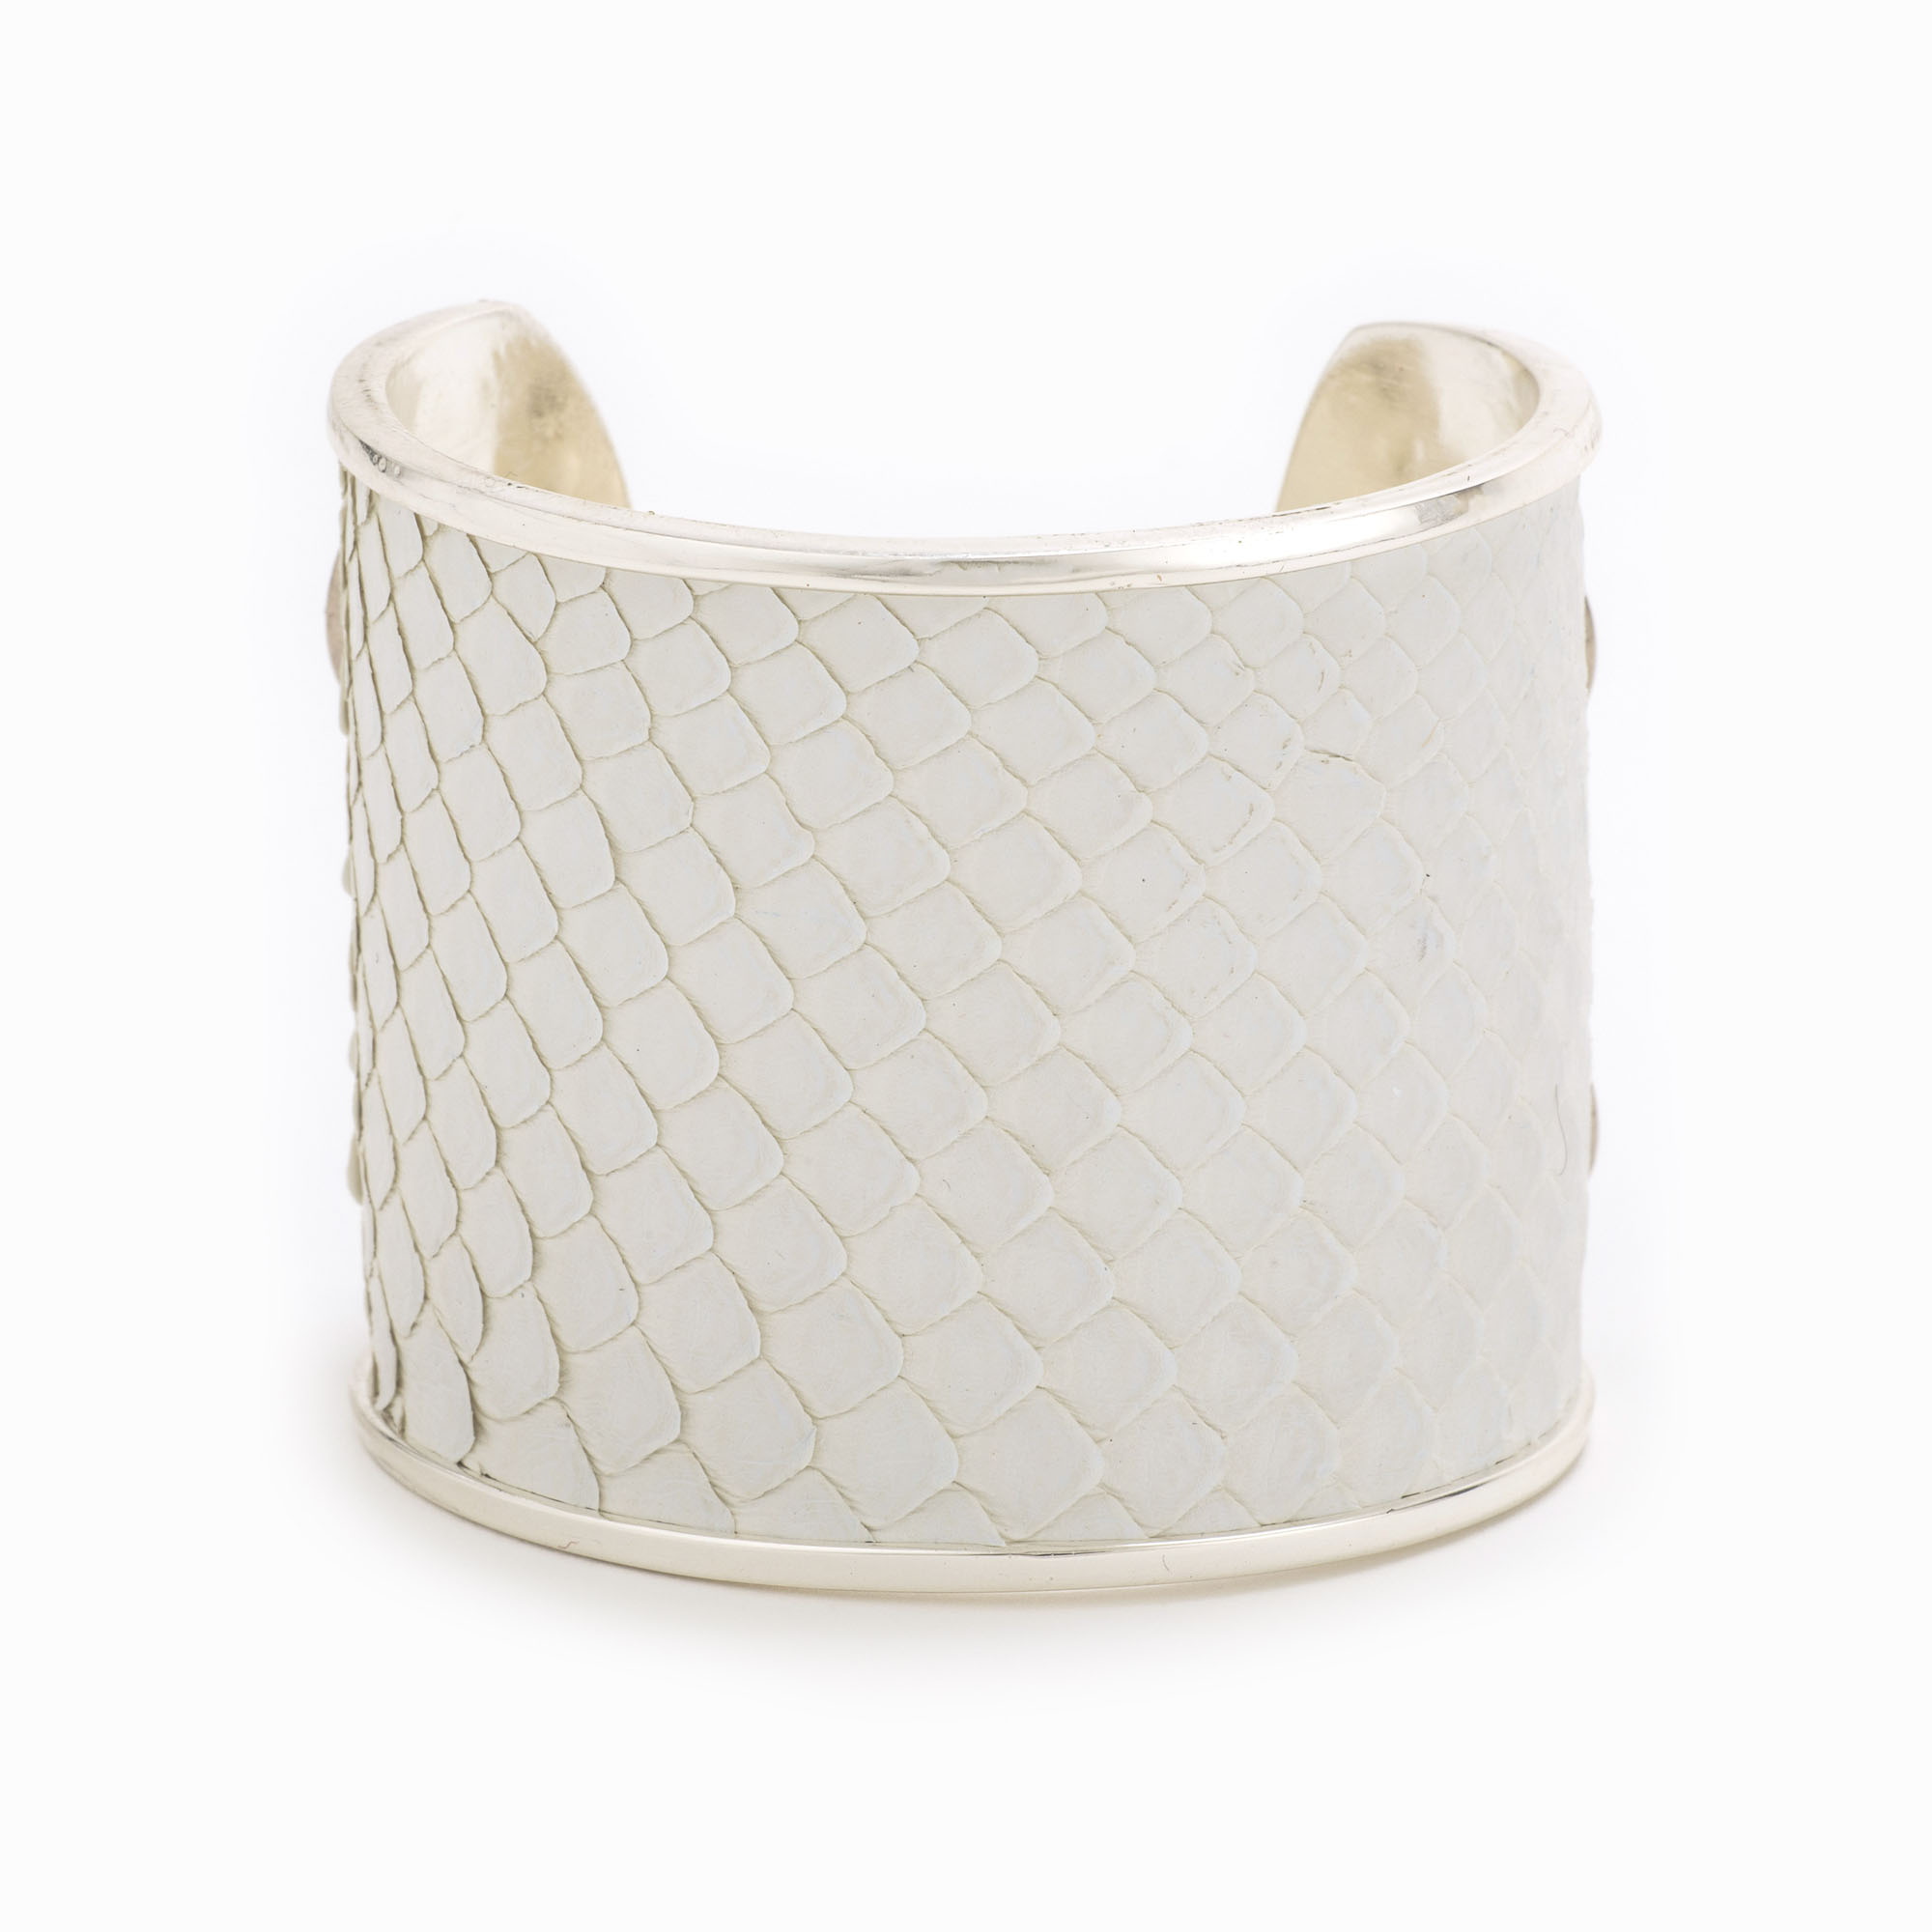 Featured image for “Large White Silver Cuff”